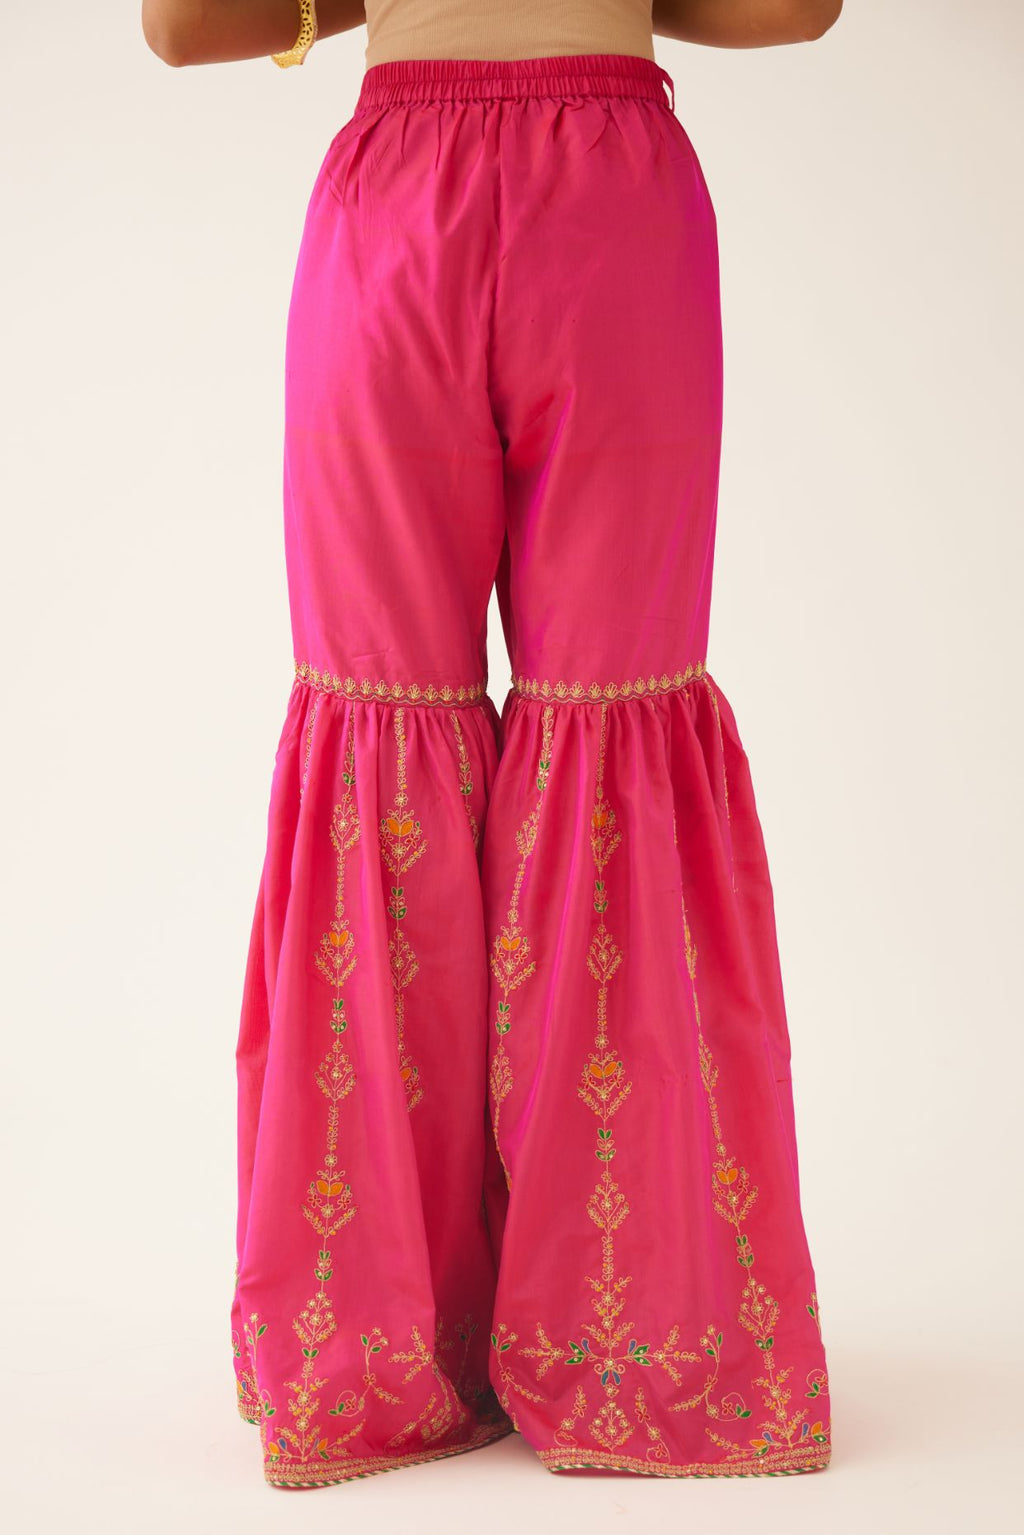 Raspberry silk farshi with delicate dori and silk thread embroidery, highlighted with dori embroidery at knee joint seam.